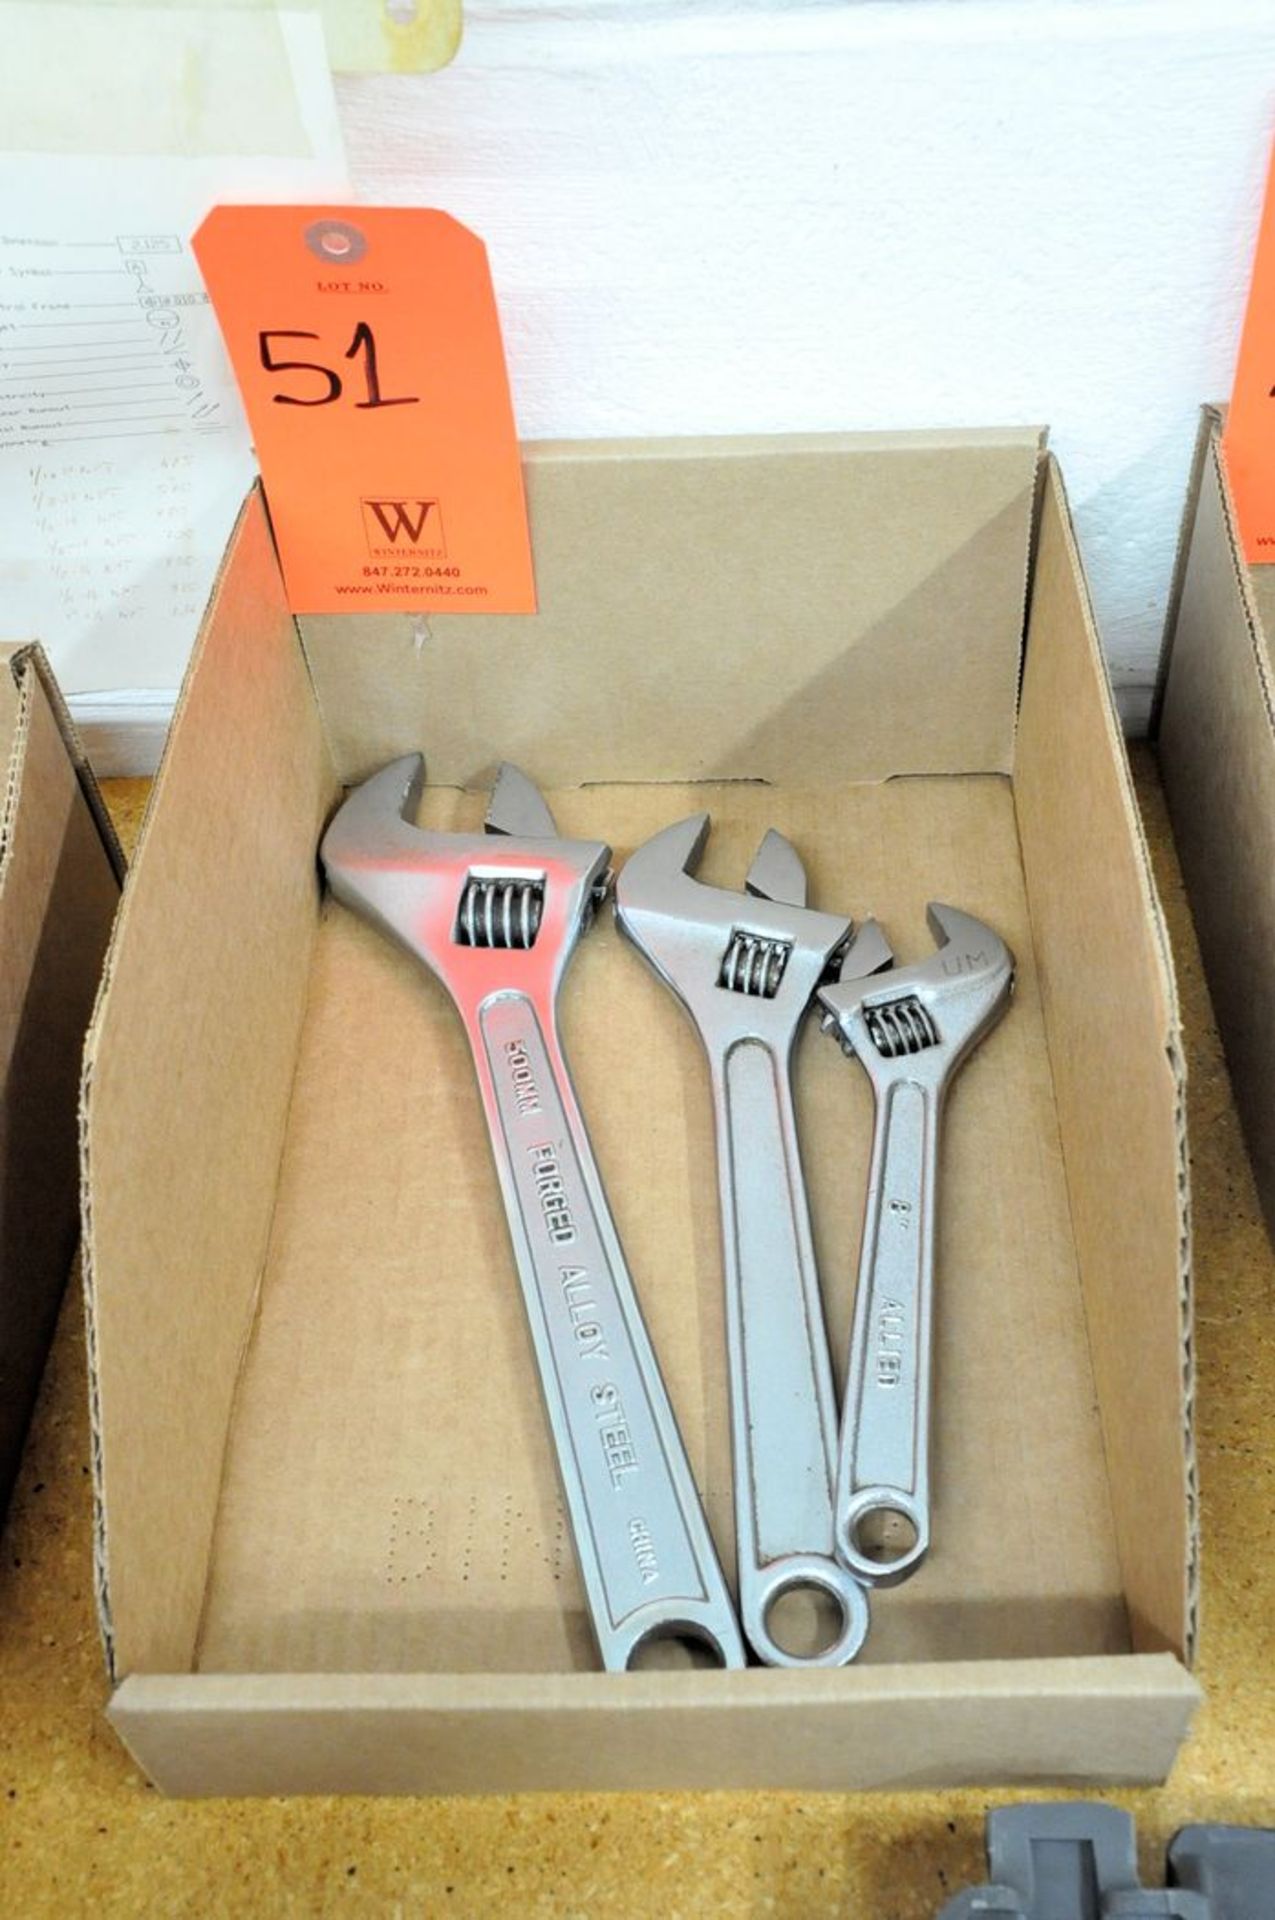 Lot - Adjustable Wrenches Ranging From 8" to 24" in (2) Boxes - Image 2 of 2